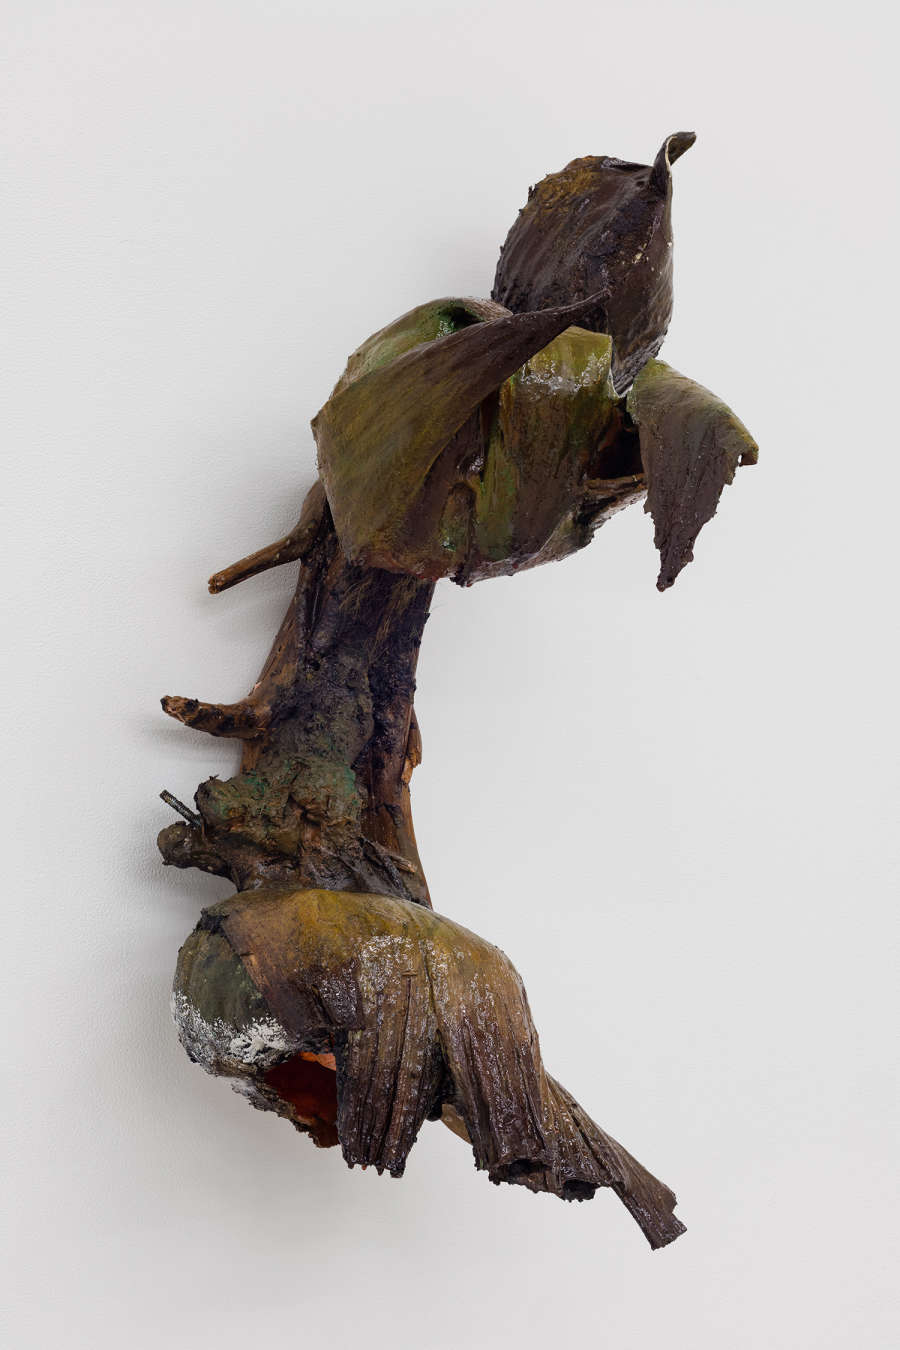 Image of a sculpture by Brandon Ndife. Hanging on a gallery wall is a brown/black plant like growth covered in dirt and debris. There are cavities created by corn husks that hold some other objects, all clinging to a few sticks and branches.